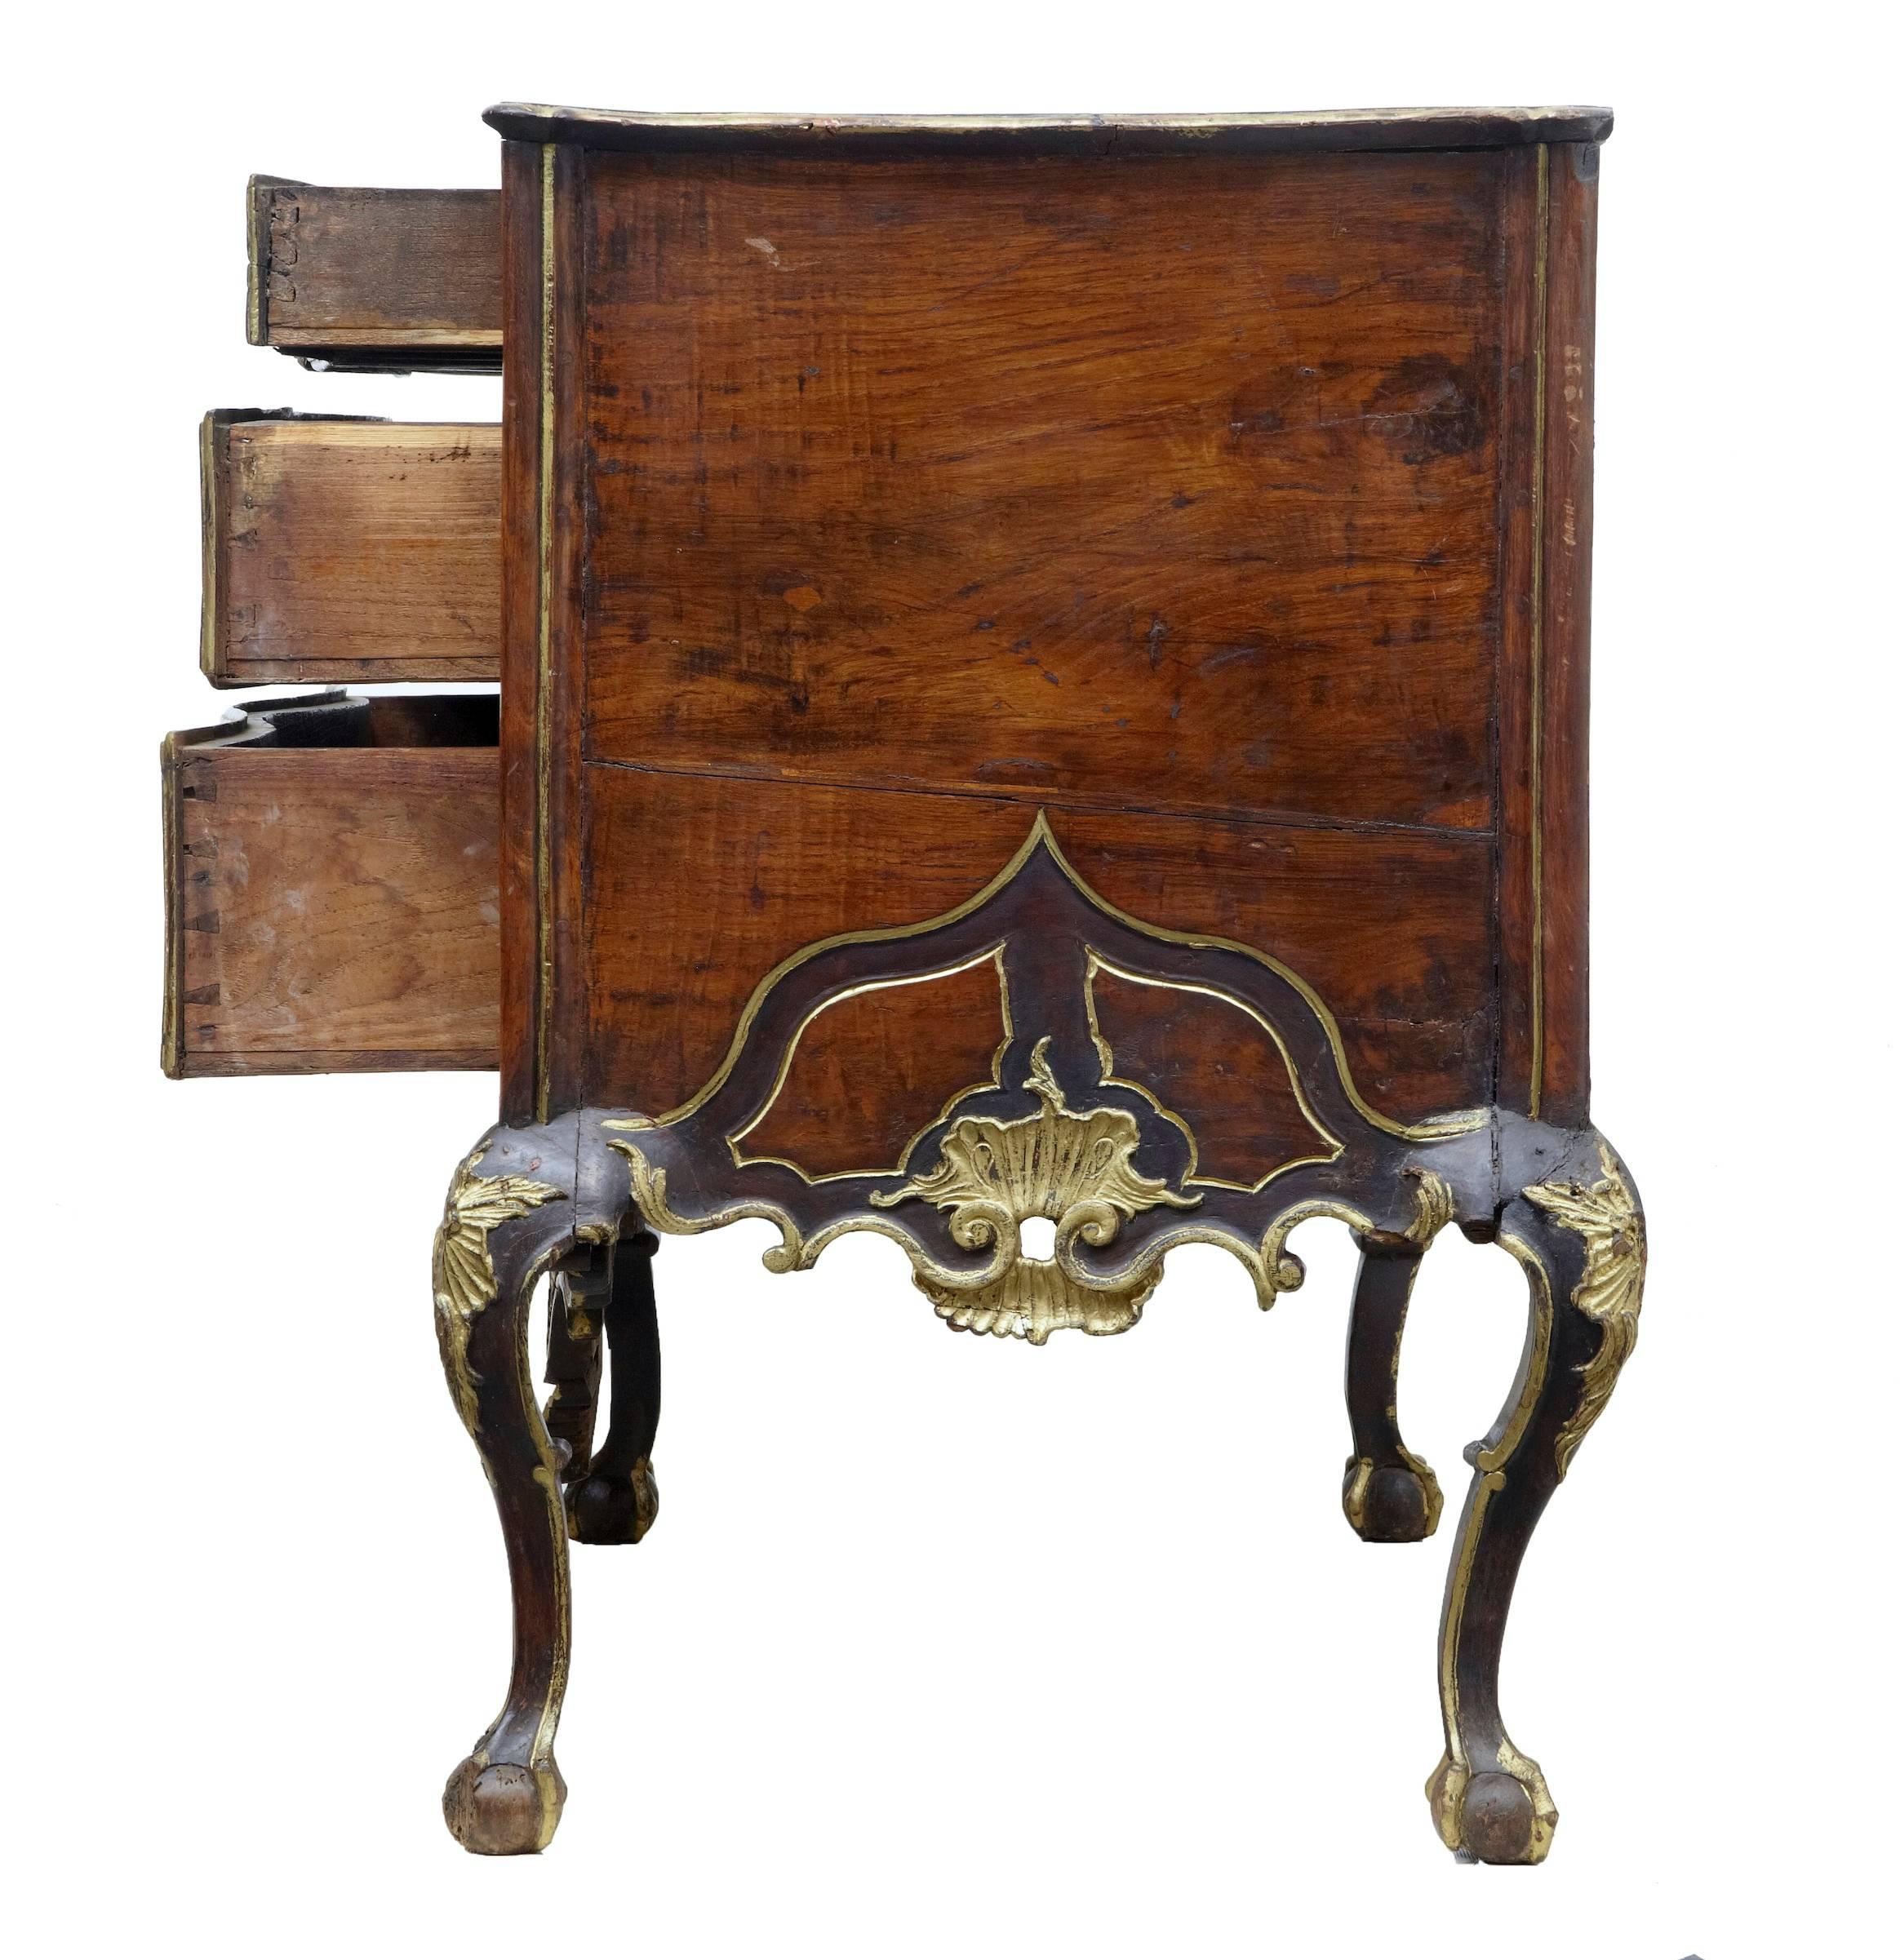 Portuguese 18th Century Portugese Carved Walnut and Gilt Commode